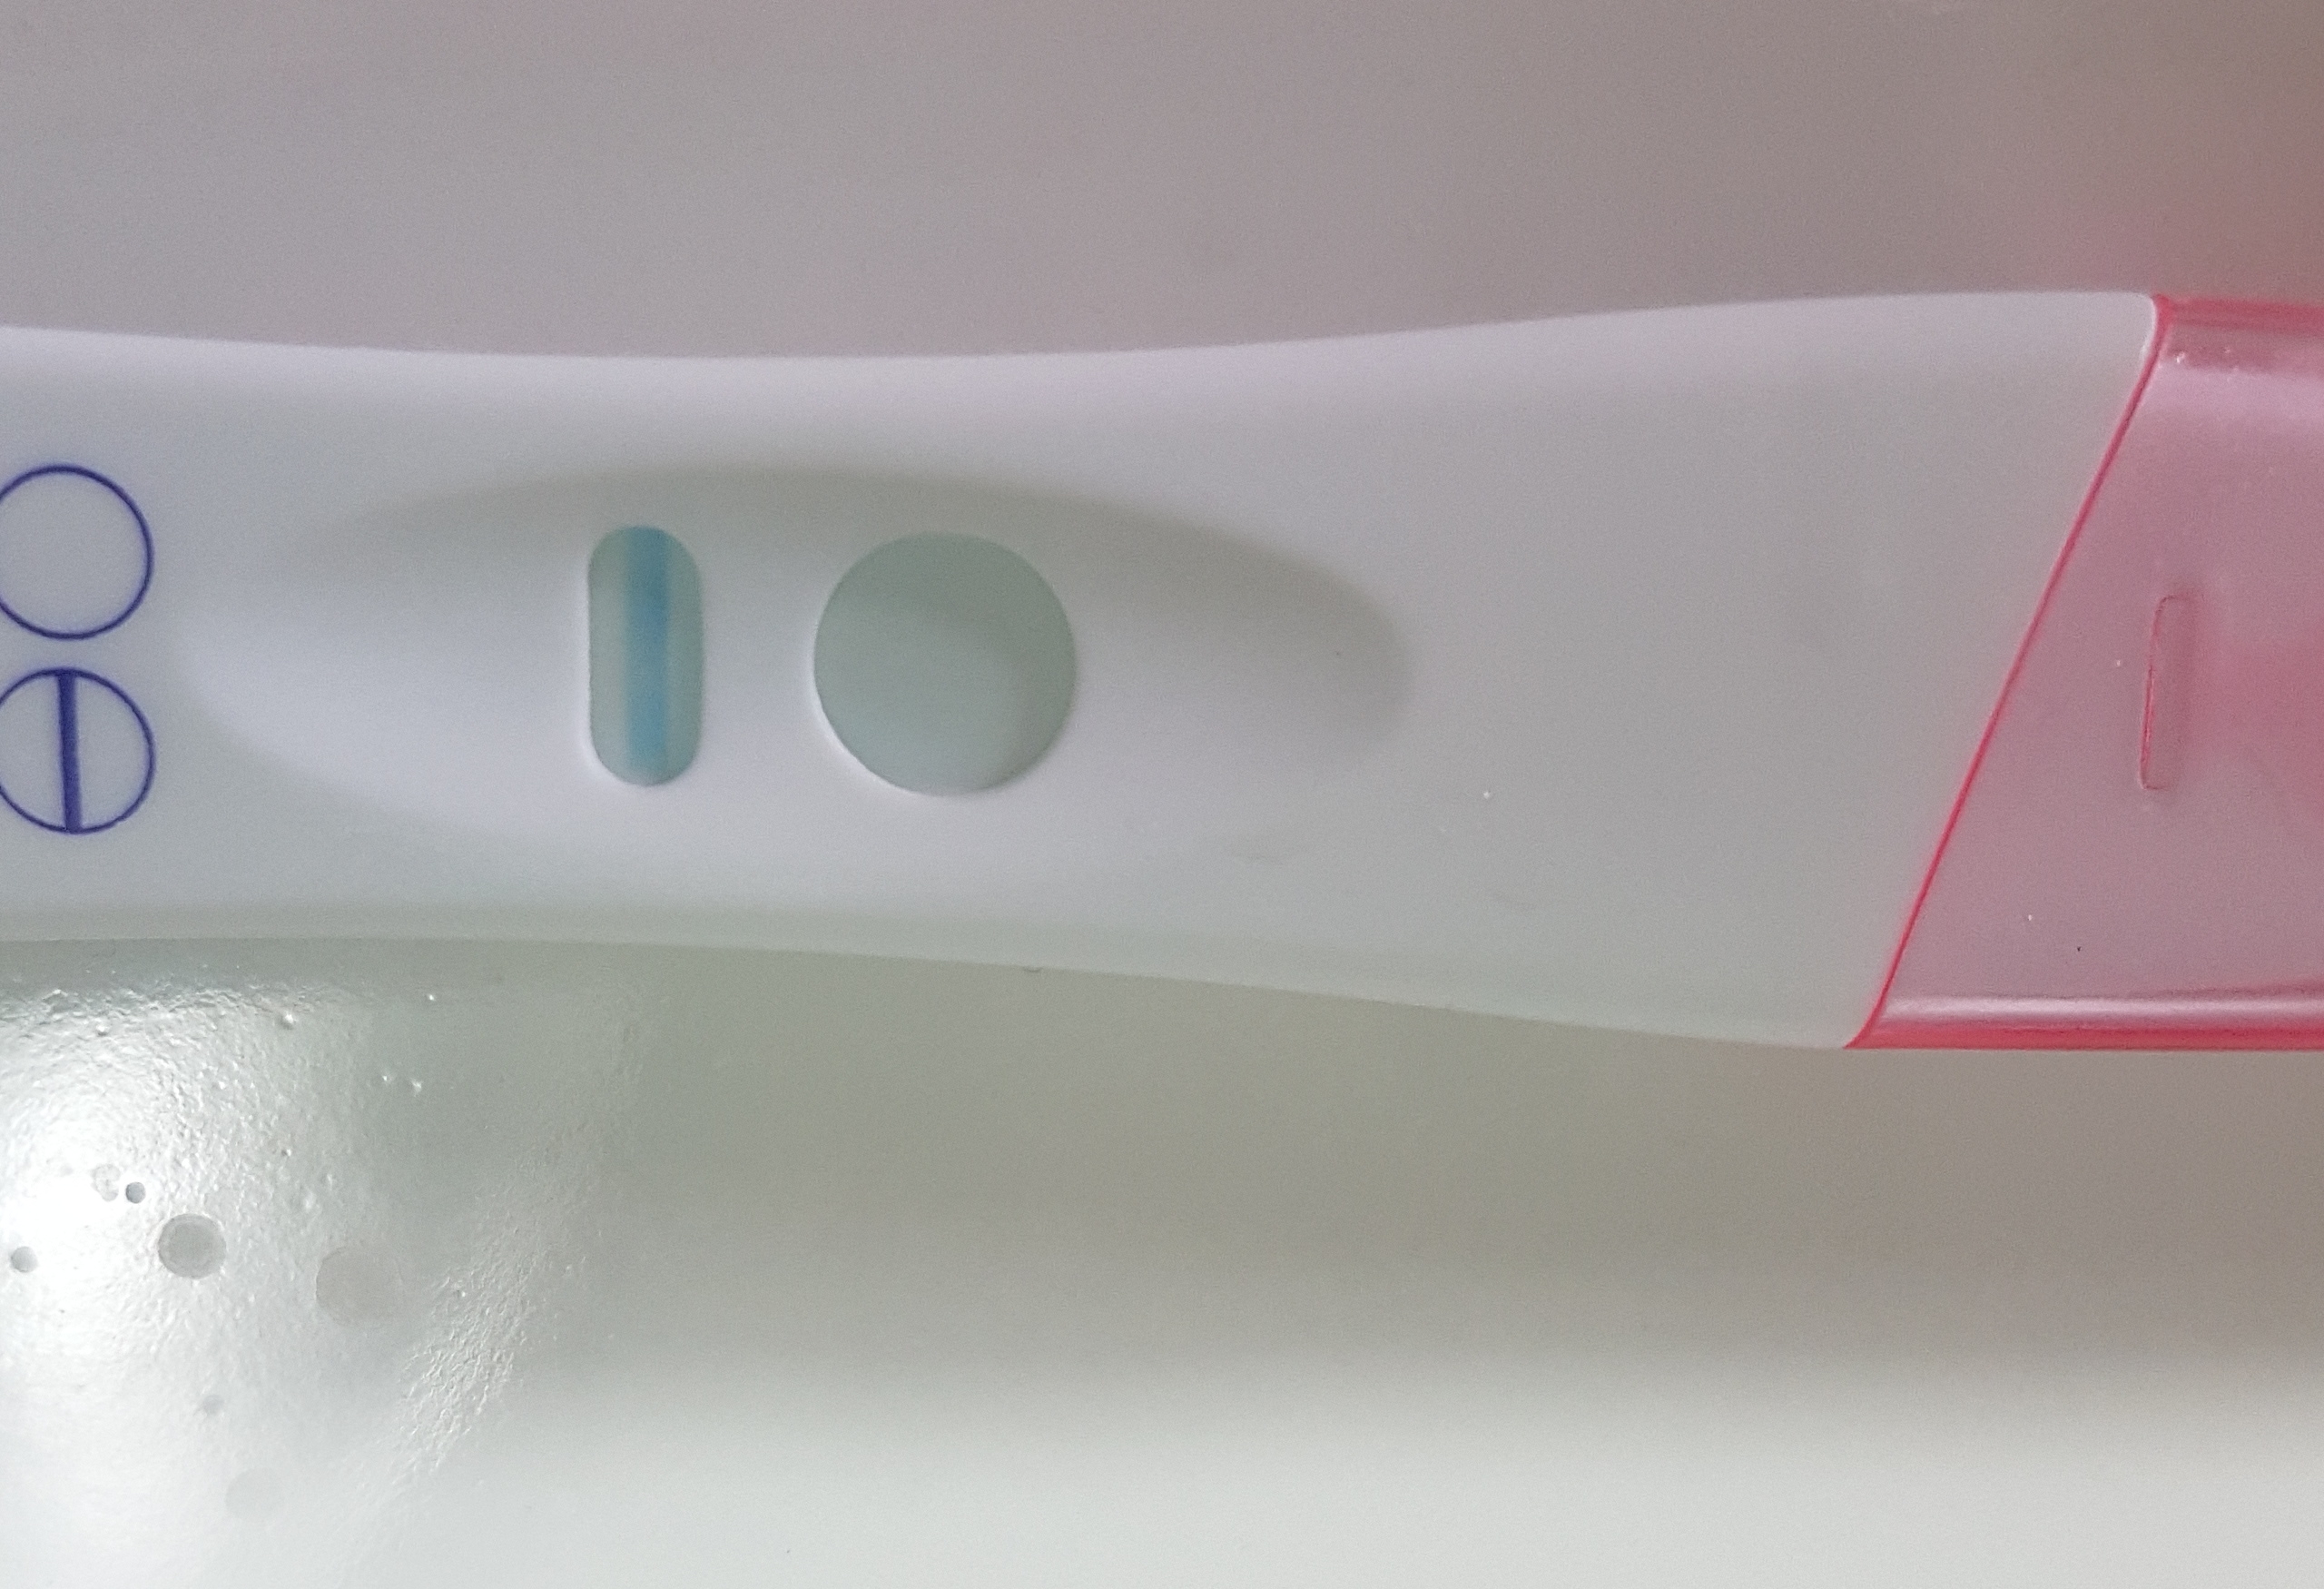 Equate Pregnancy Test, 11 Days Post Ovulation, Cycle Day 27